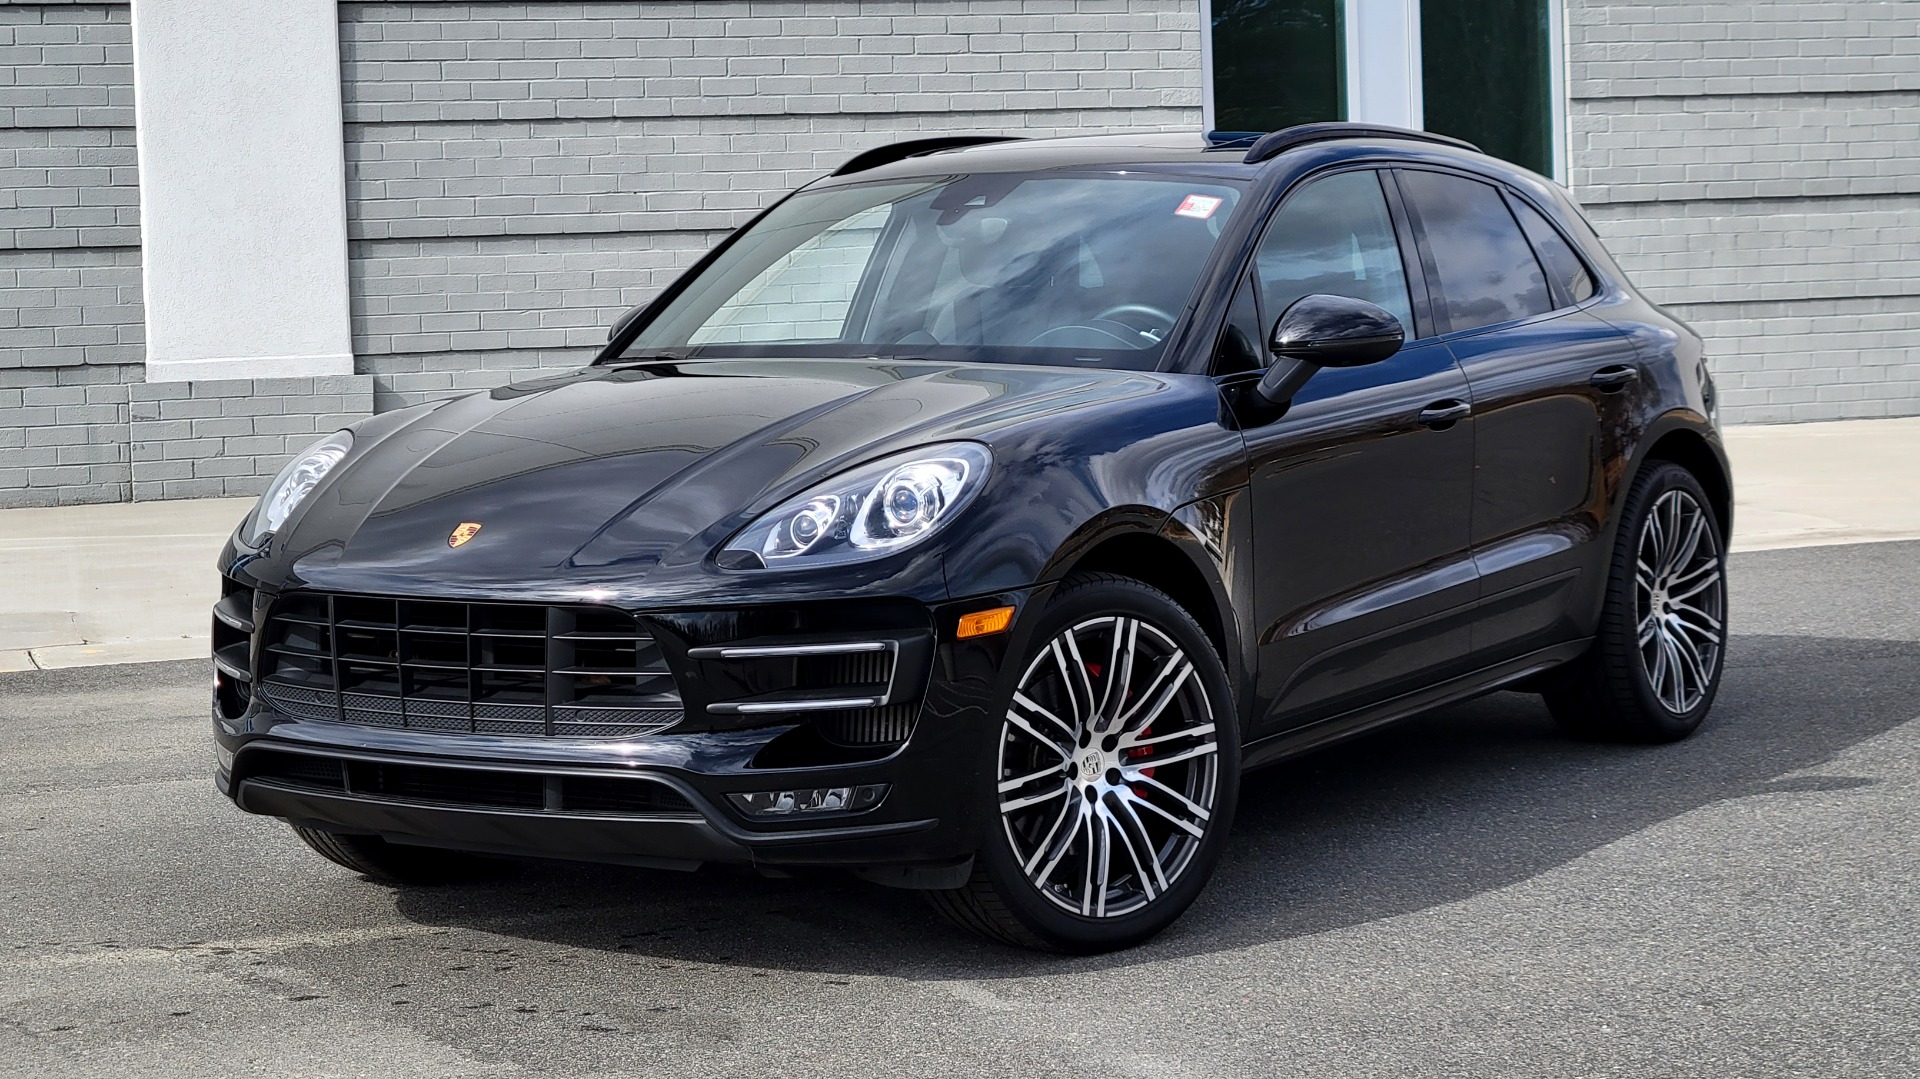 Used 2016 Porsche MACAN TURBO 3.6L PREMIUM / NAV / BOSE / SUNROOF / REARVIEW for sale Sold at Formula Imports in Charlotte NC 28227 1